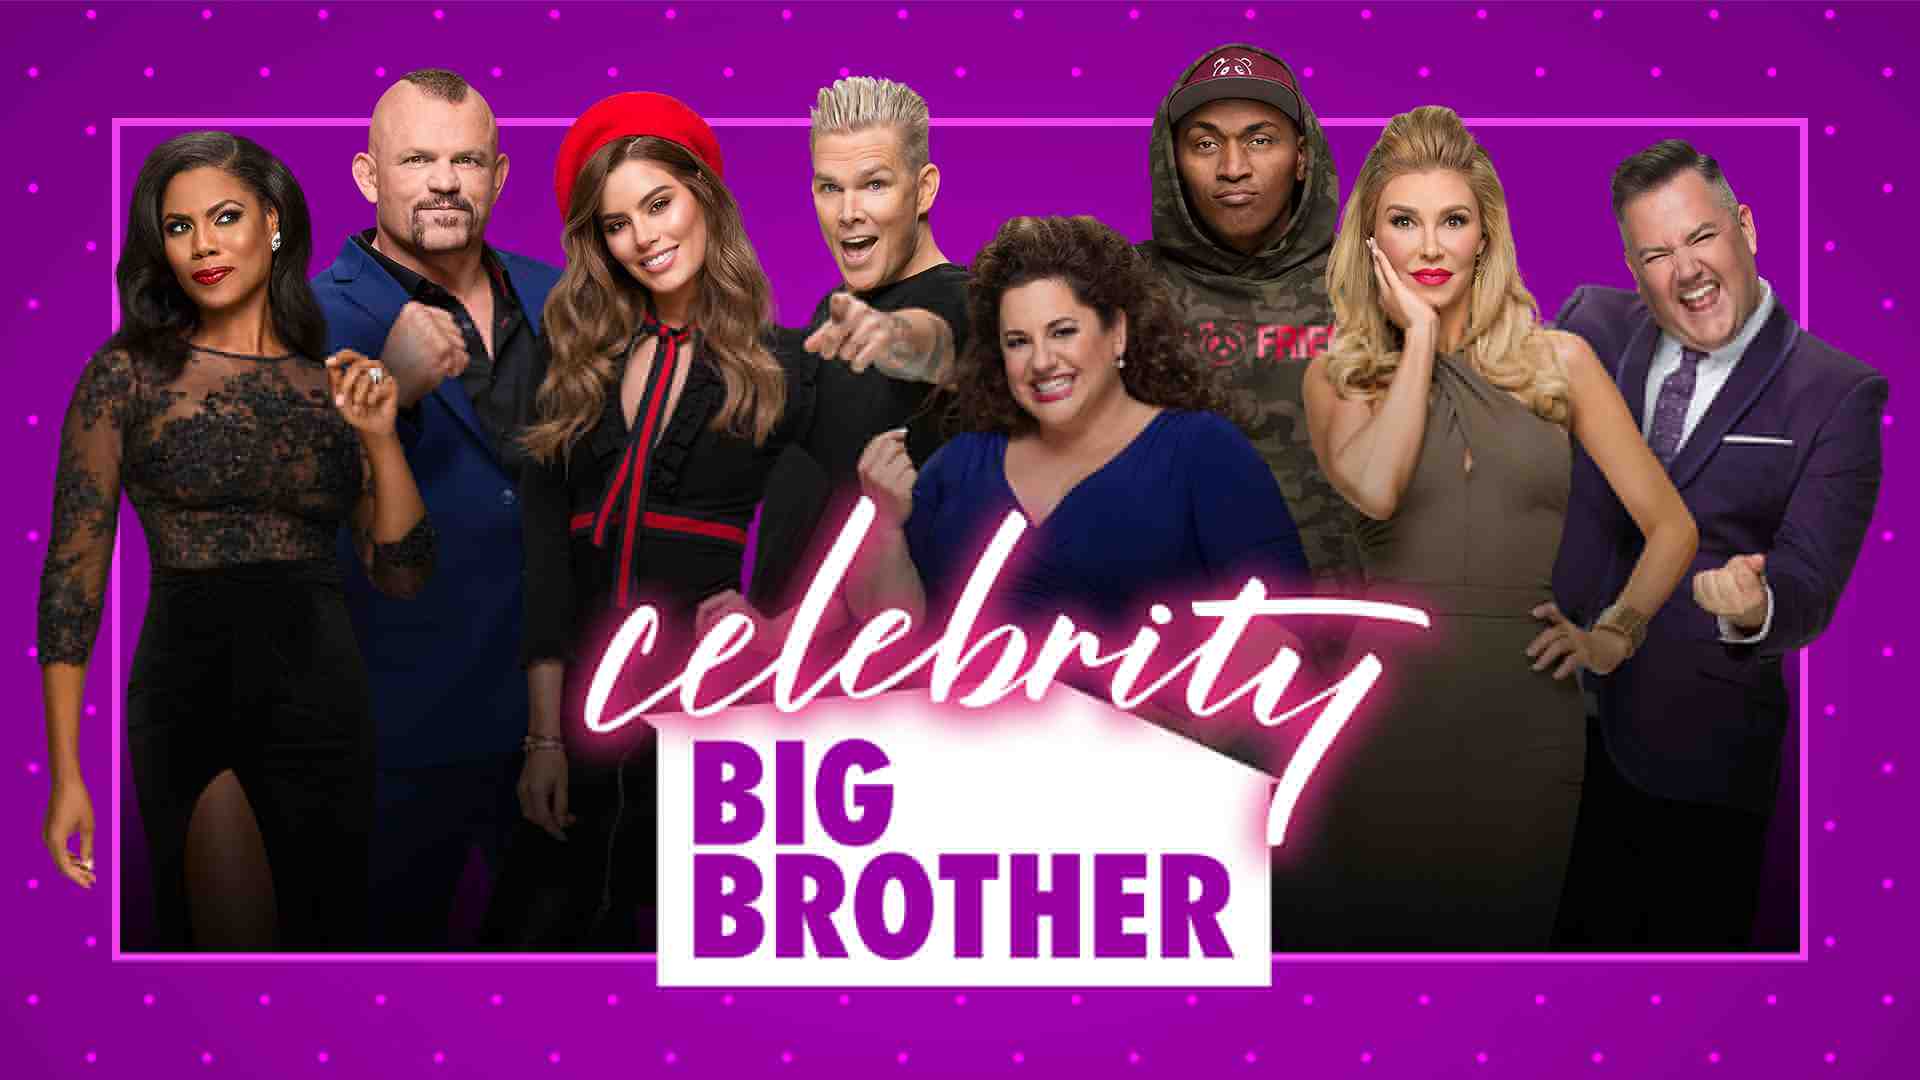 Celebrity Big Brother parents guide and age rating | 2022